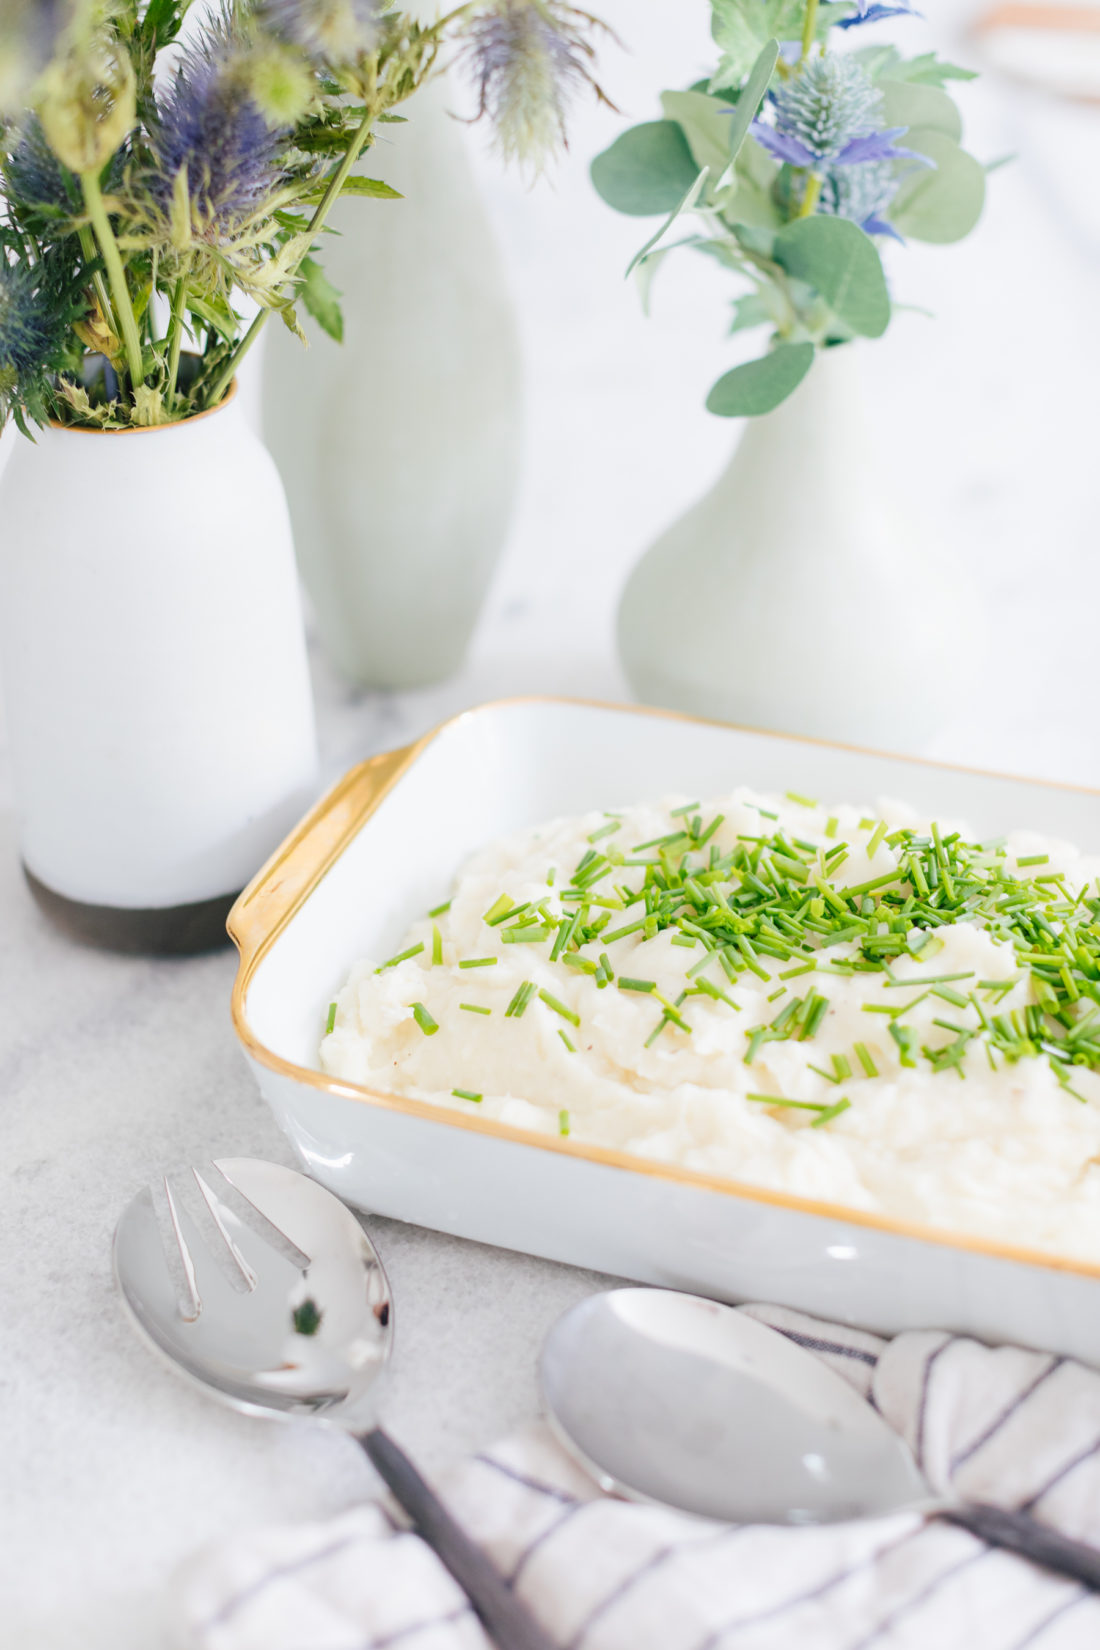 Eva Amurri Martino's Garlicky Goat Cheese & Chive Whipped Potatoes recipe is a great cows milk free Thanksgiving side dish